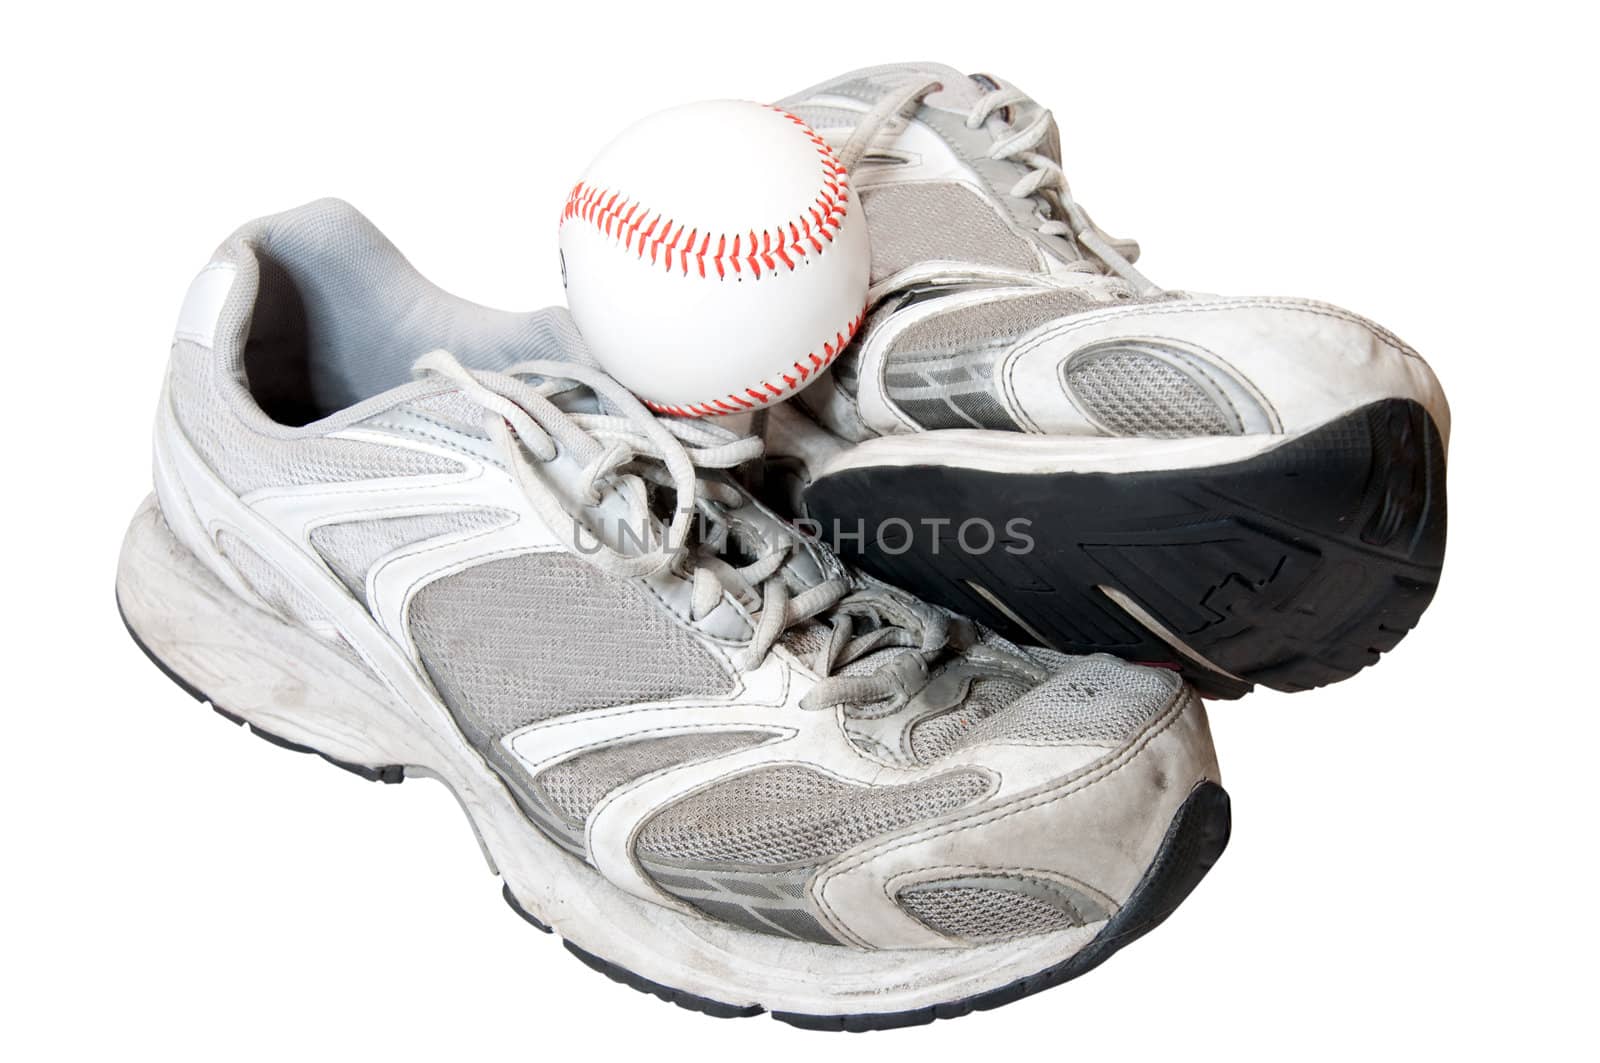 Old shoes and baseball isolated on white background with clipping path.